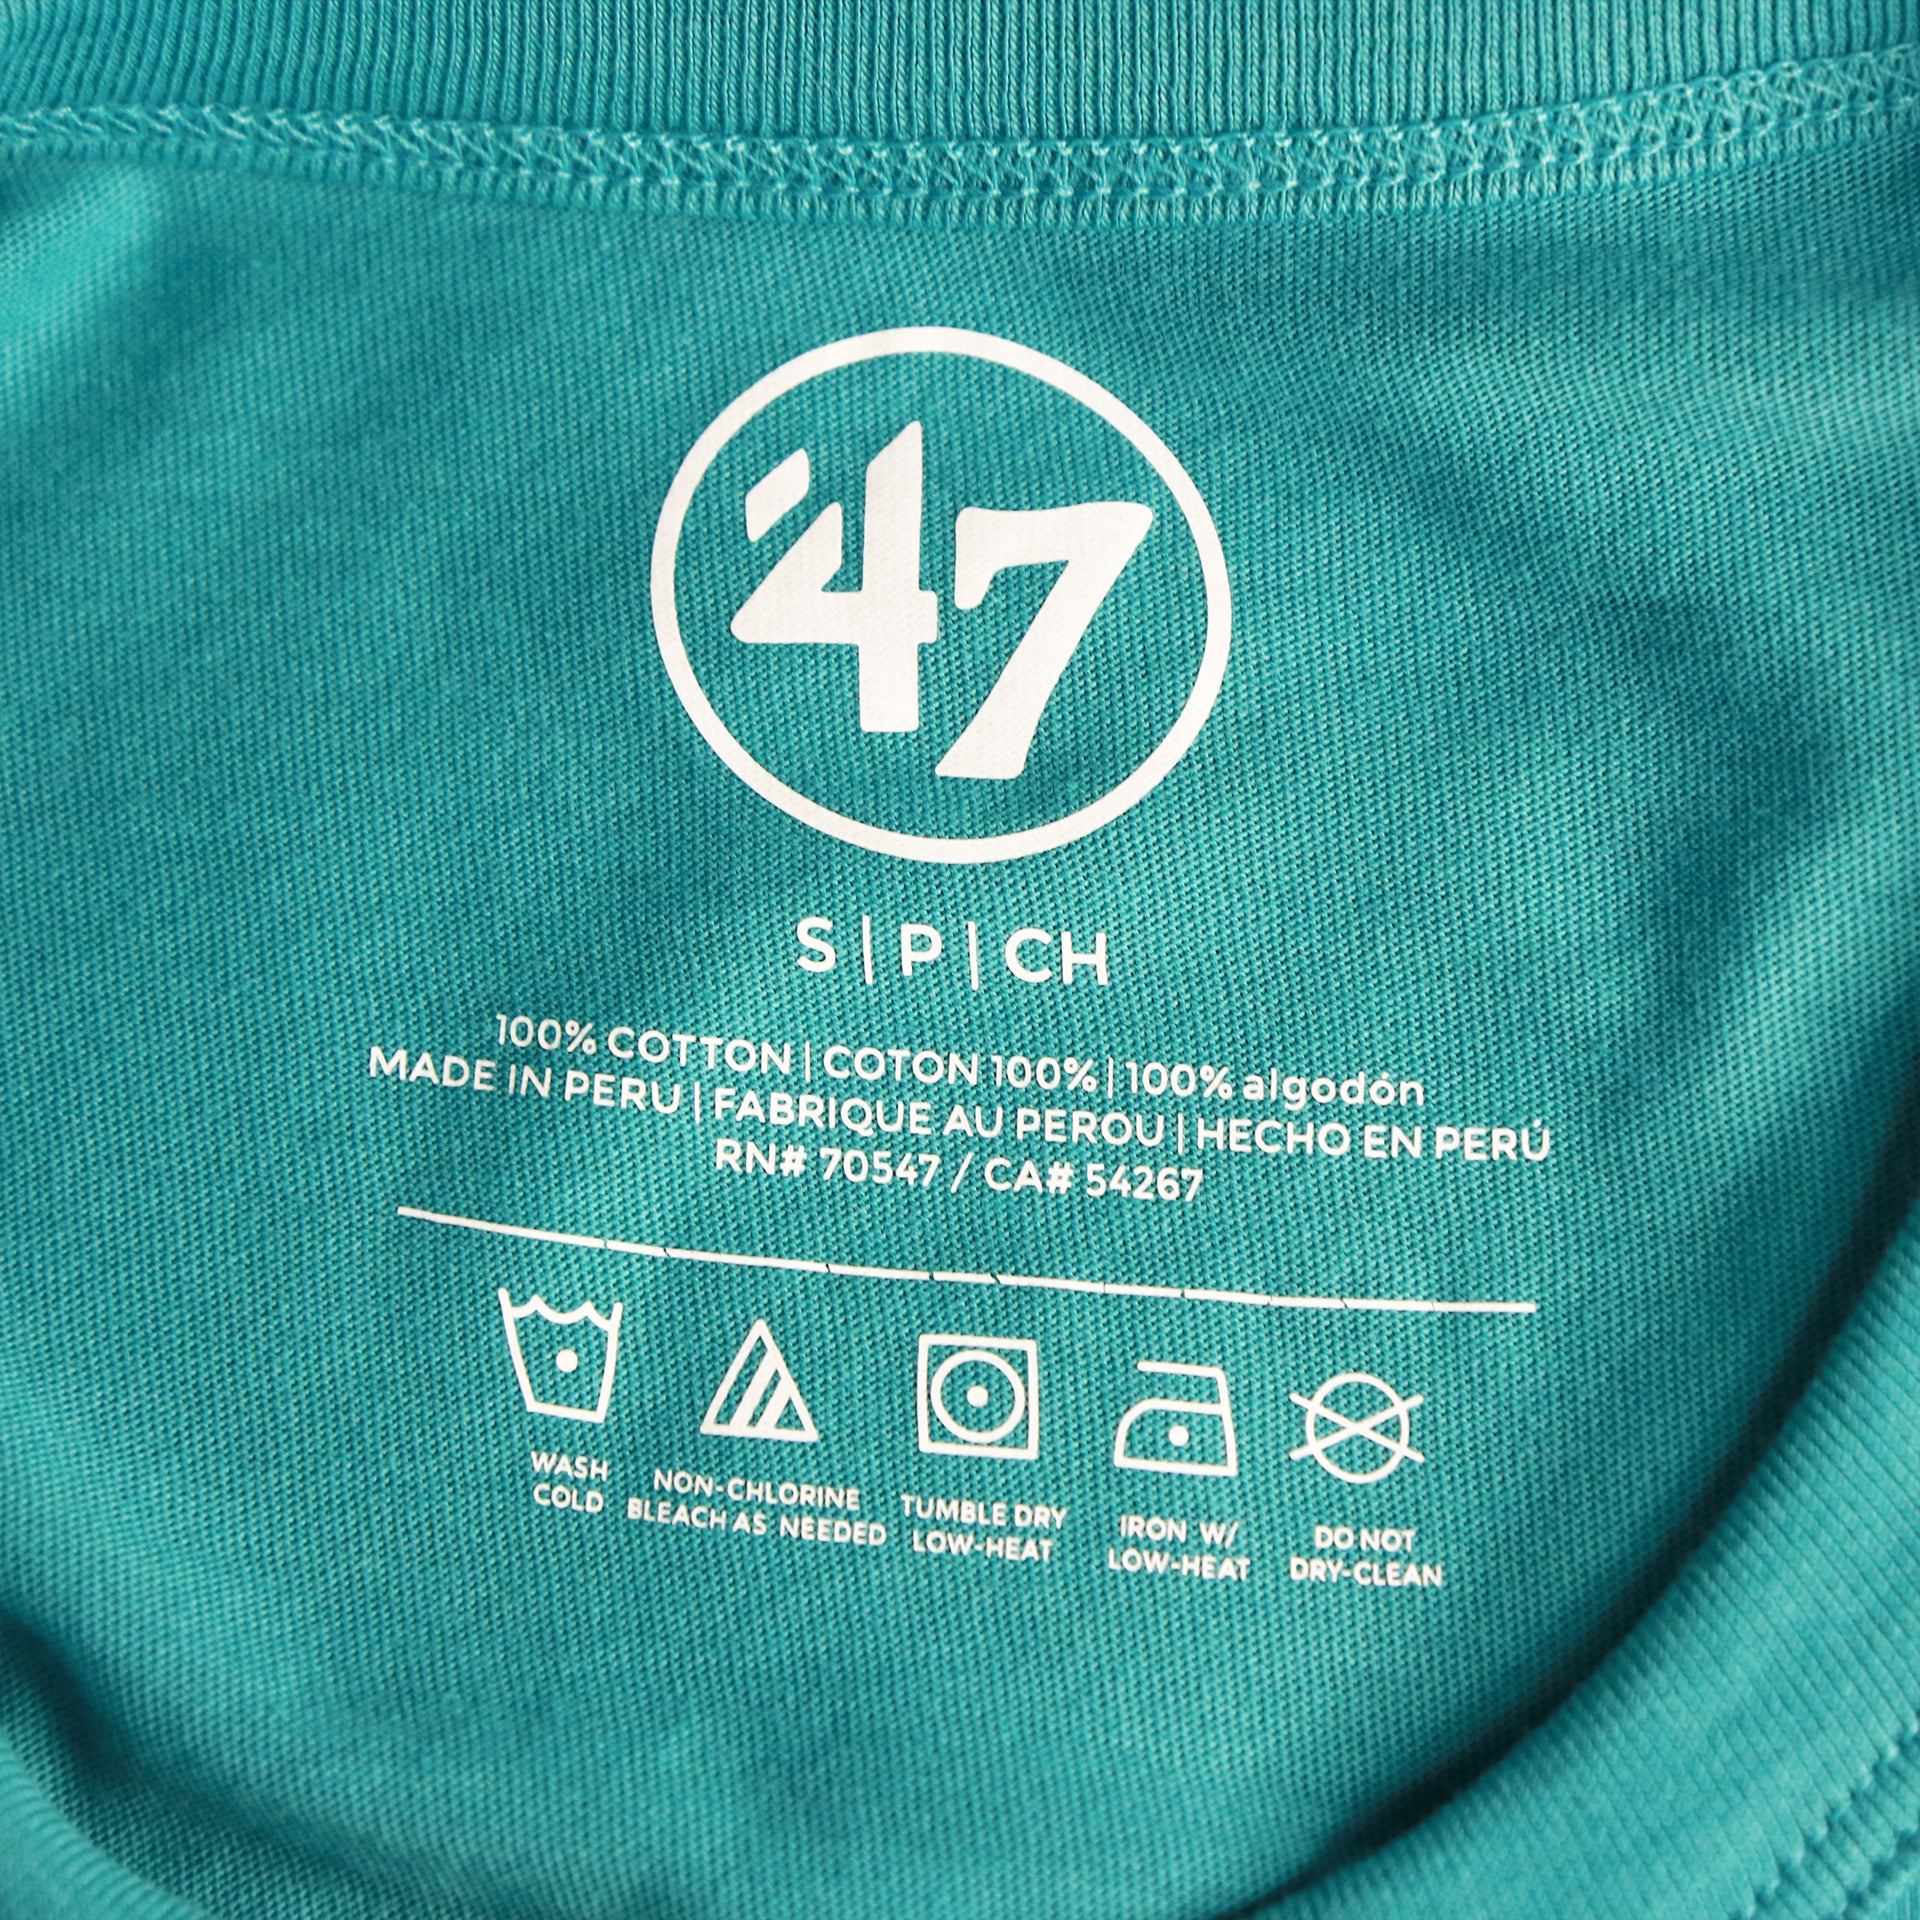 The tags on the Throwback Miami Dolphins Worn Printed 1974 Dolphins Logo Tshirt | Oceanic Teal Tshirt